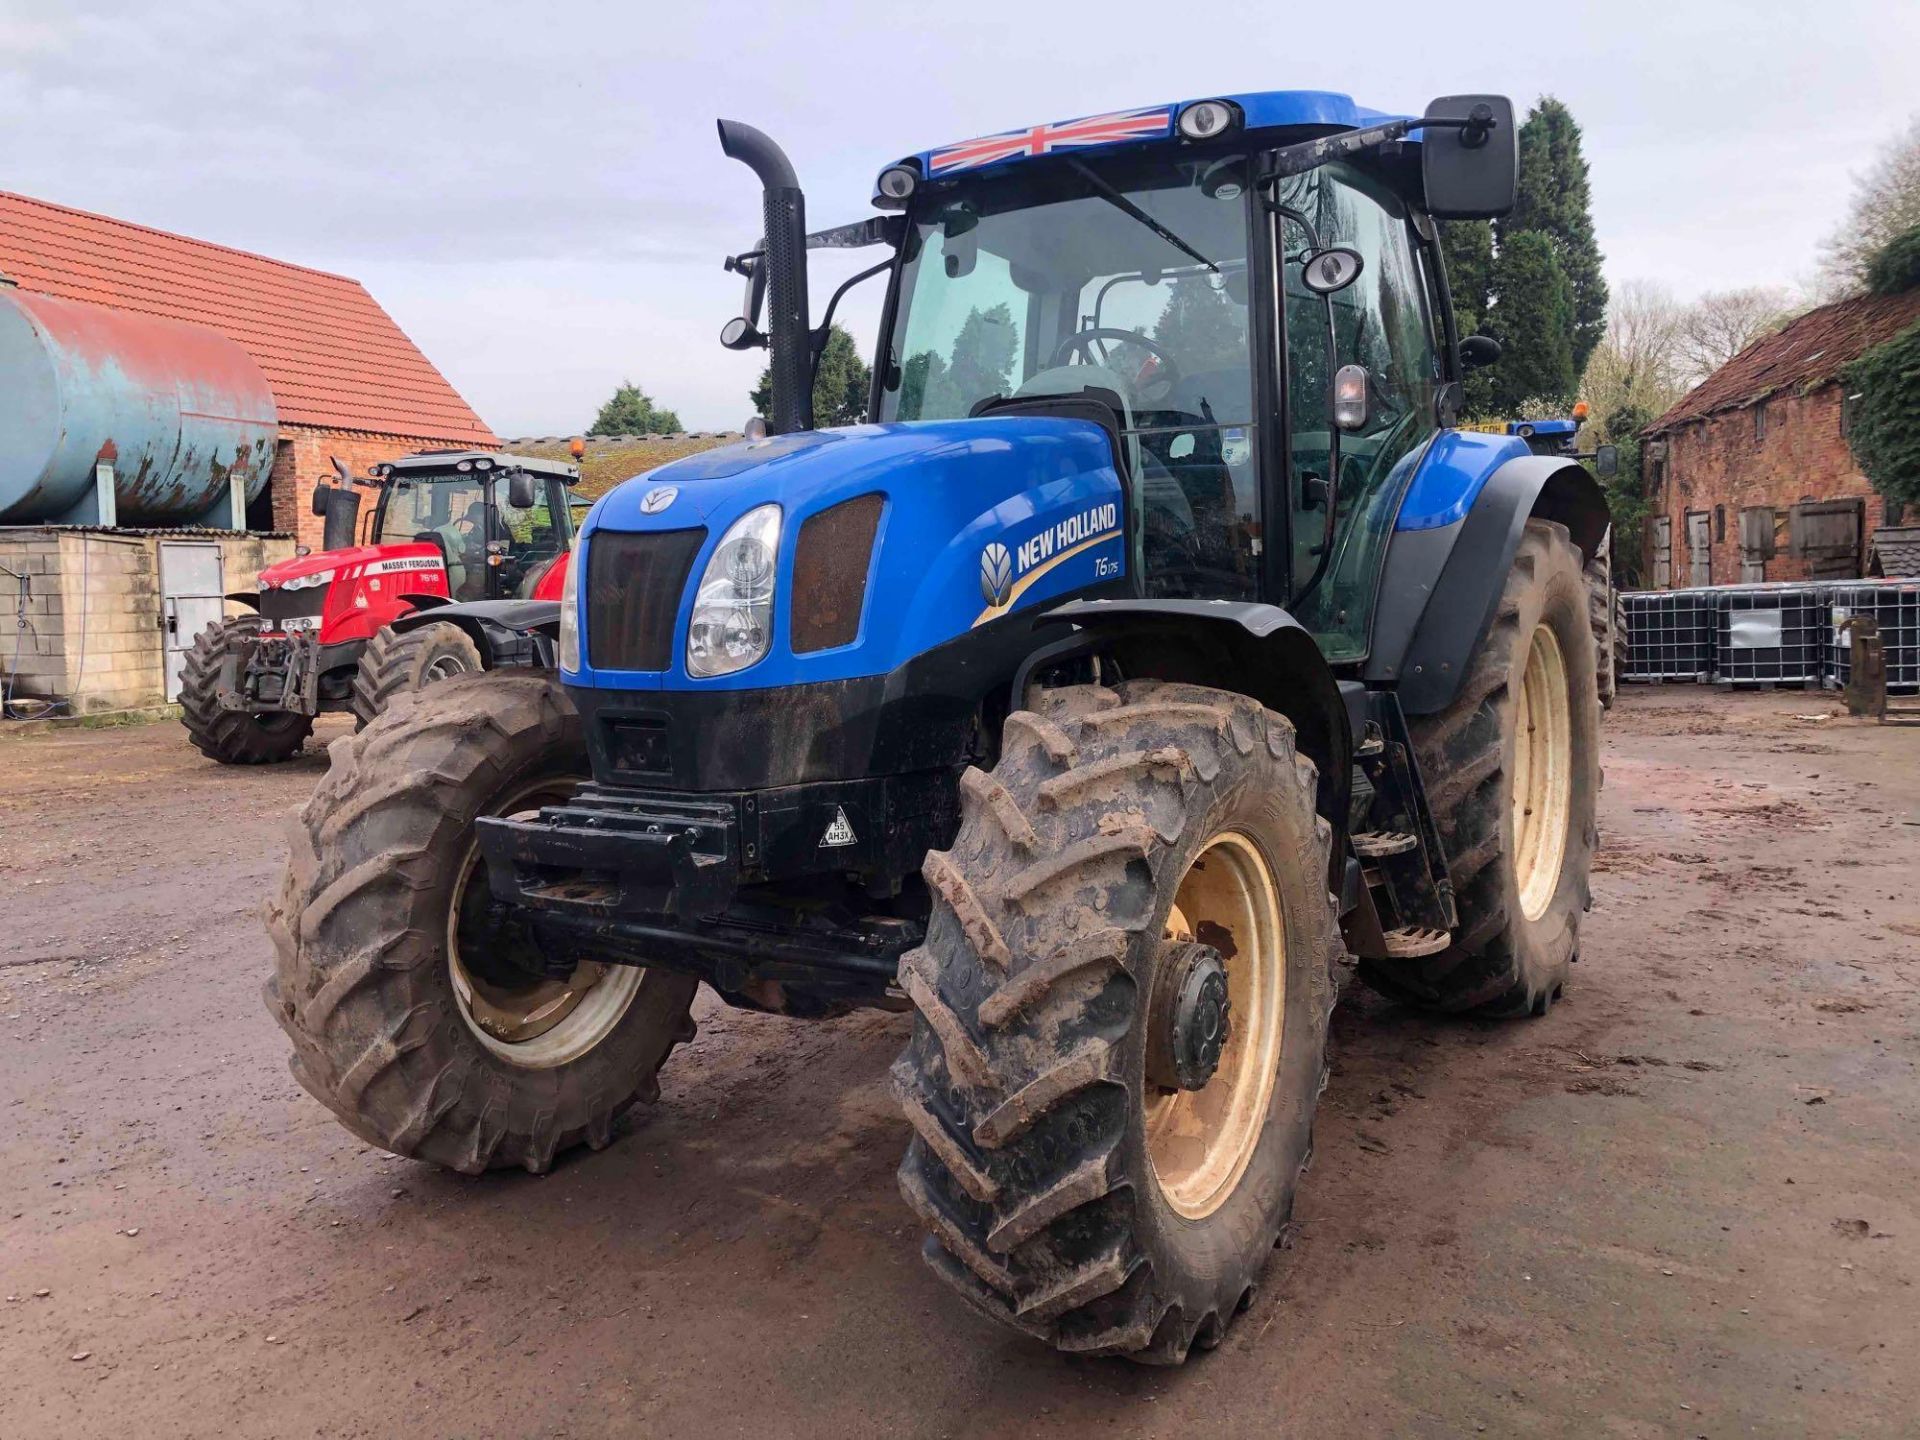 2013 New Holland T6.175 4wd tractor, 3 manual spools, air, on 420/70R28 front and 520/70R38 rear whe